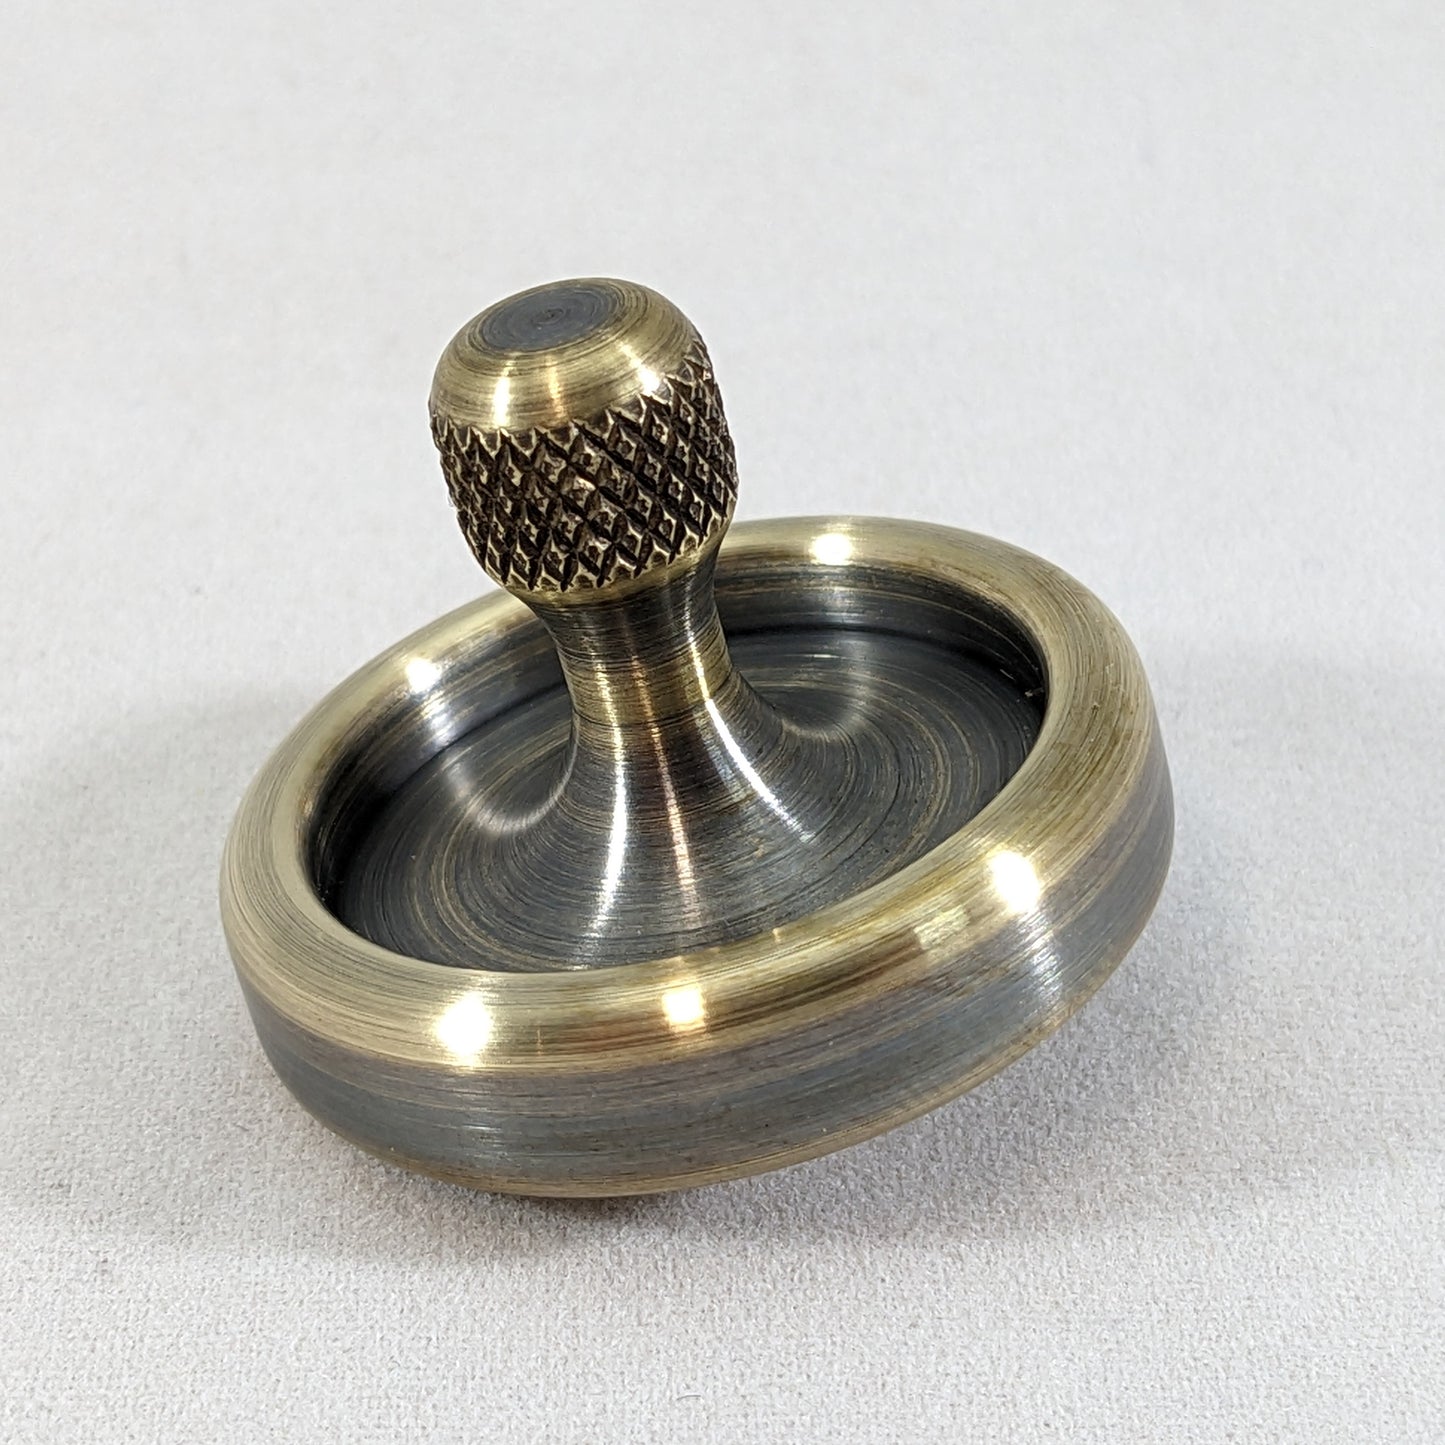 Dynamo - Antique Brass Ring w/ Knurled Grip Spindle